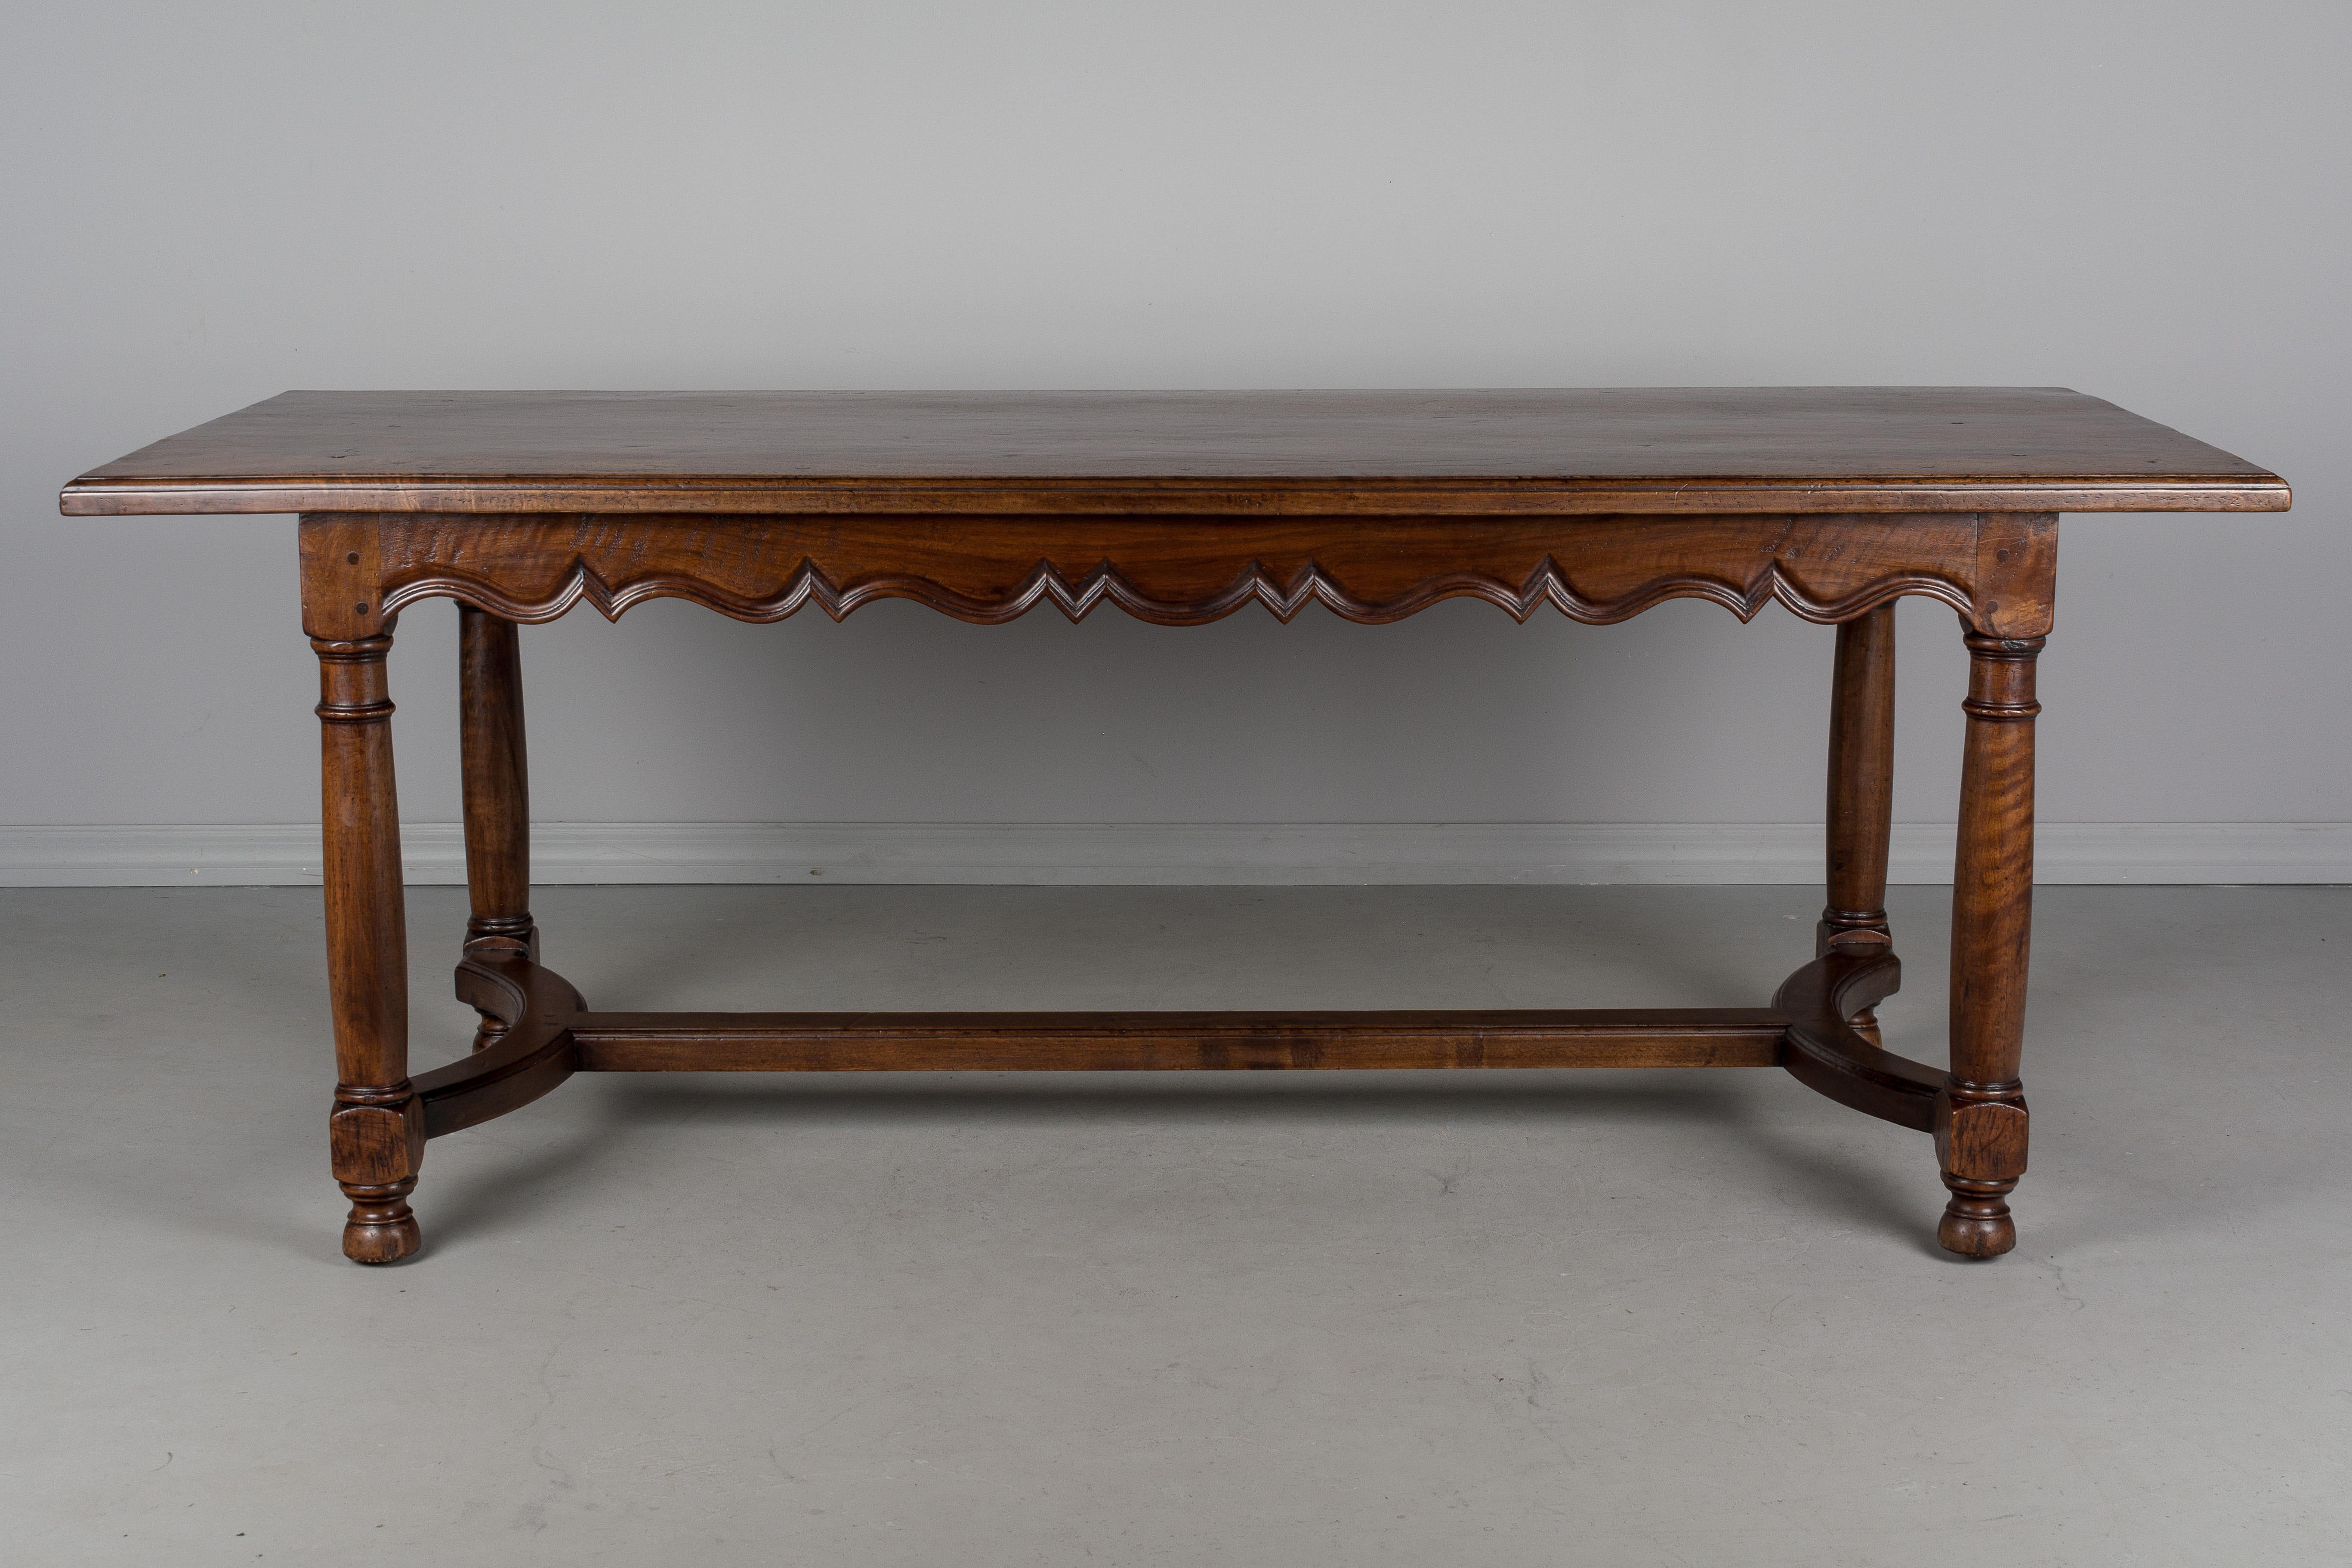 A beautiful French country farm table made of solid walnut with decorative scalloped apron, turned legs and a curved stretcher. A heavy, sturdy table of excellent quality, using pegged construction. The top is made of three planks of 1-1/4 inch